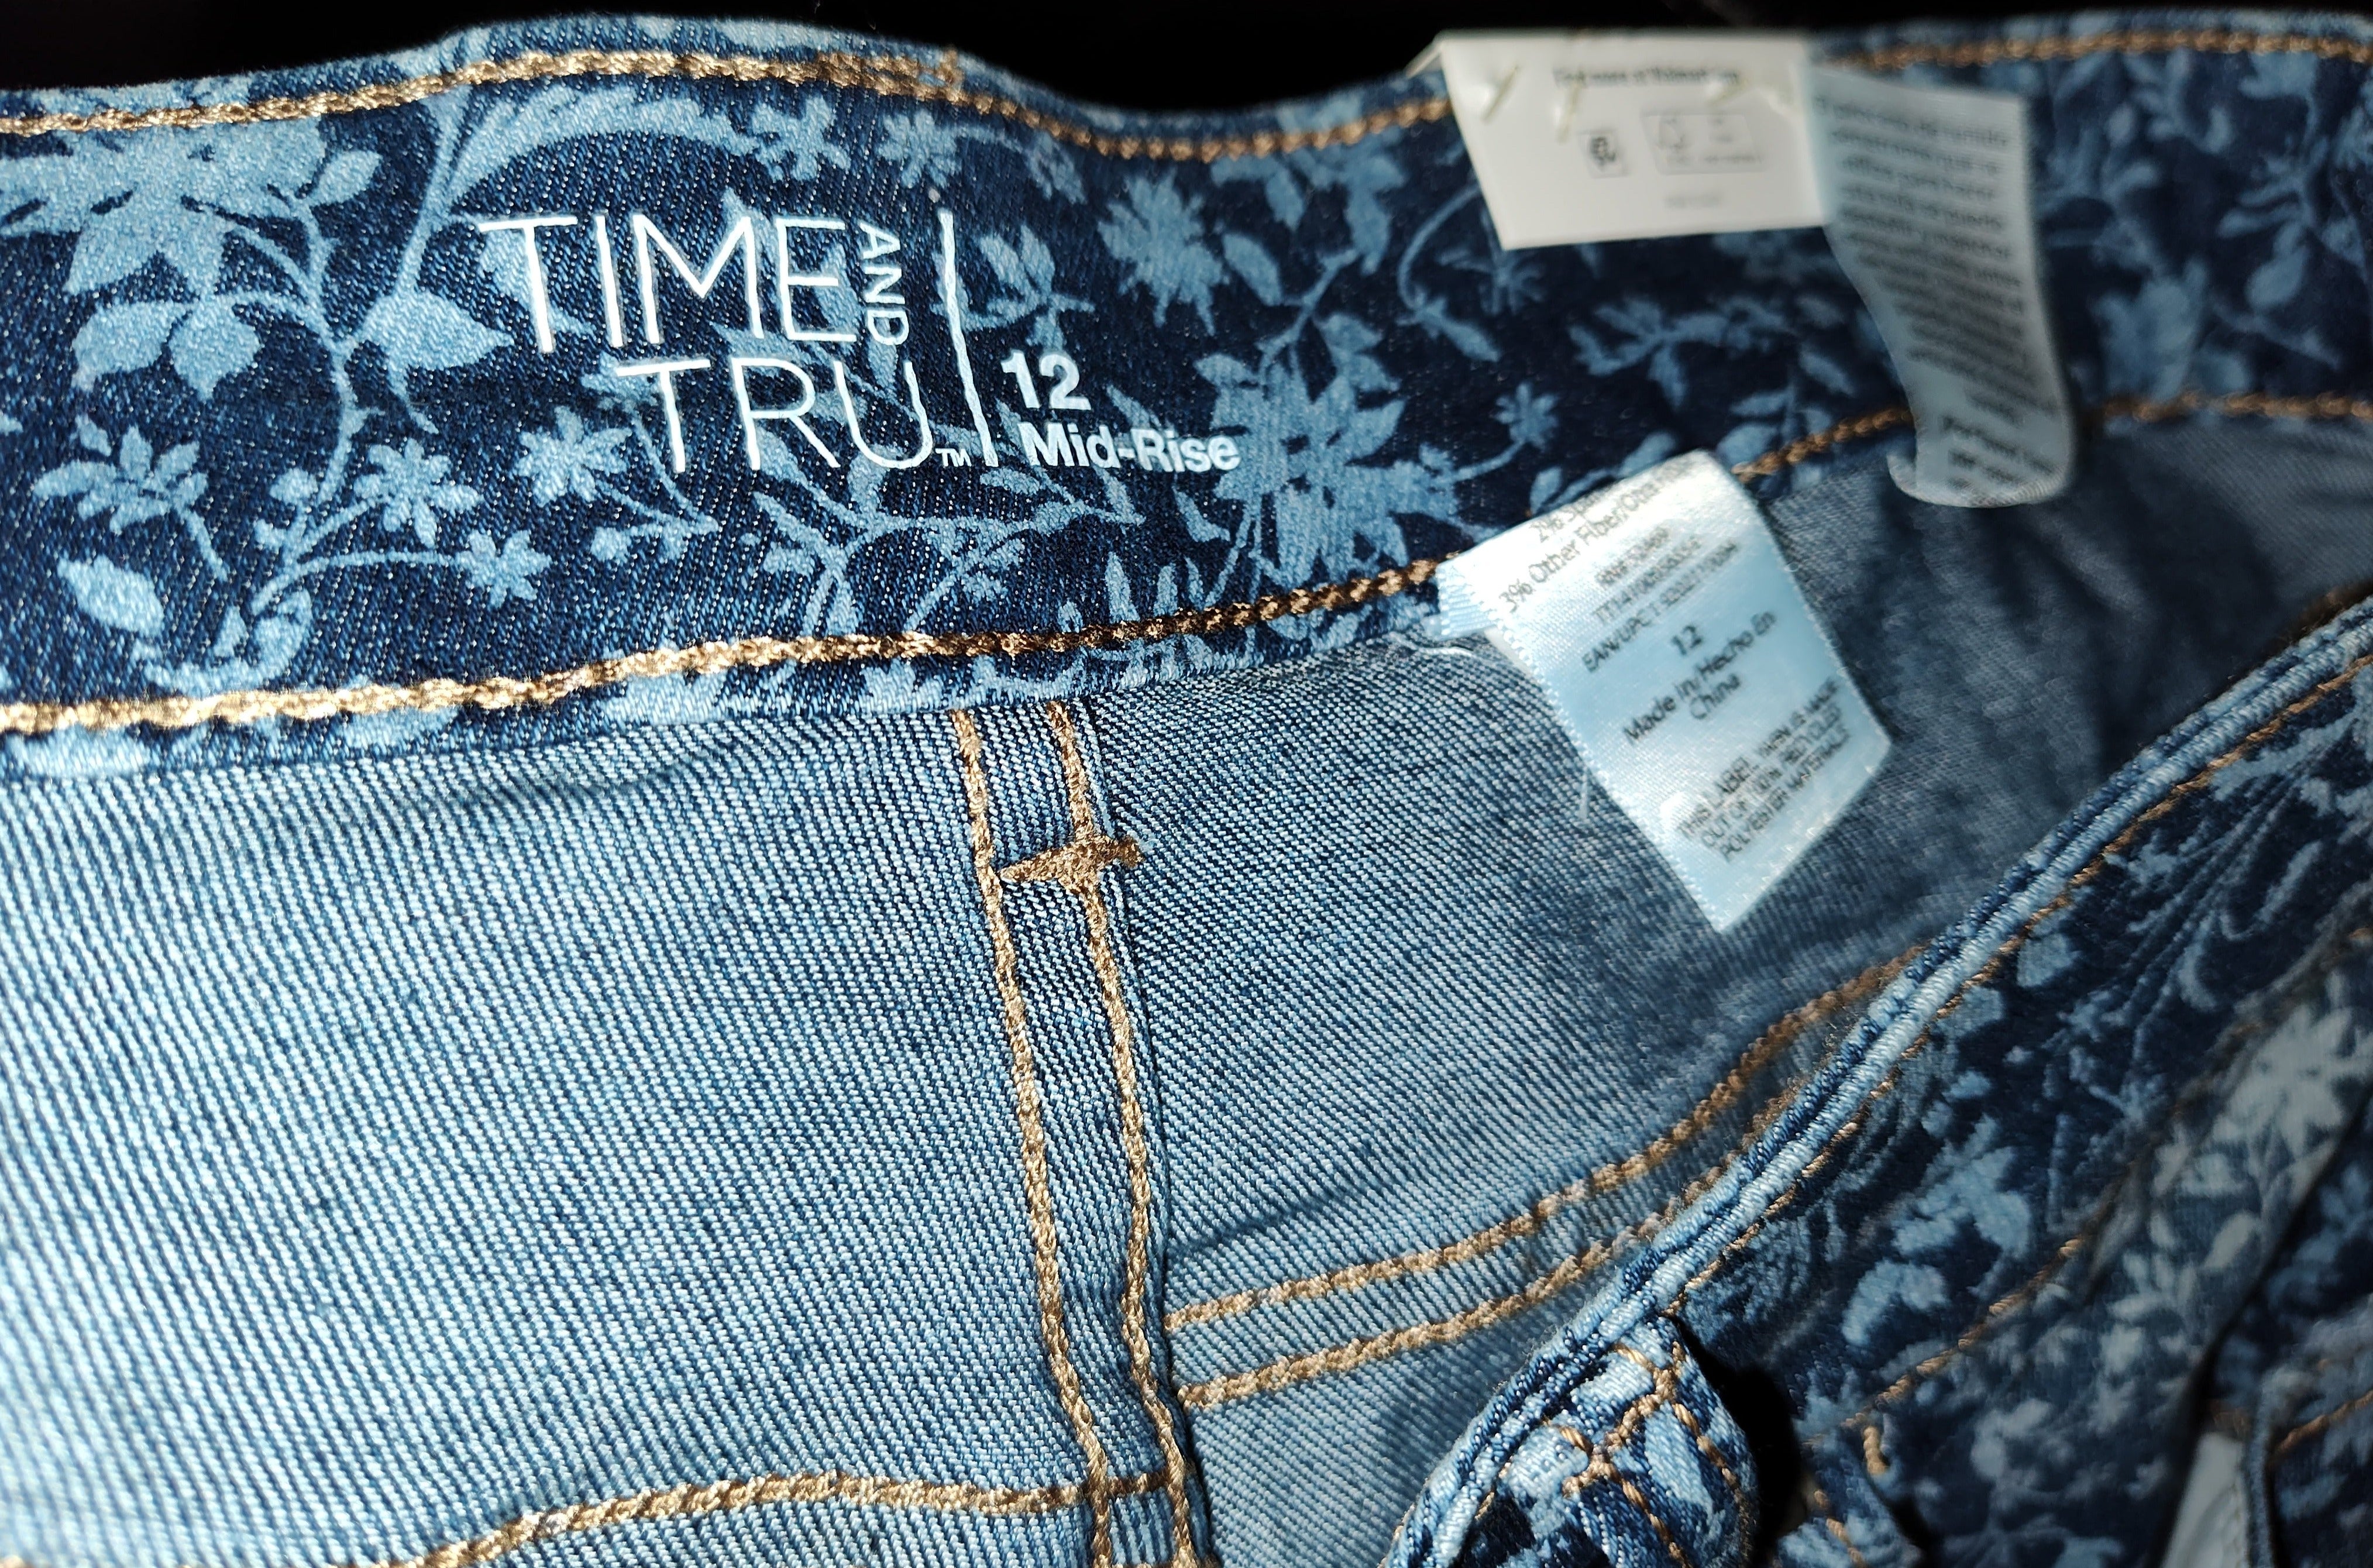 Women's Time and Tru Blue Floral Mid-rise Denim Shorts - new with tags